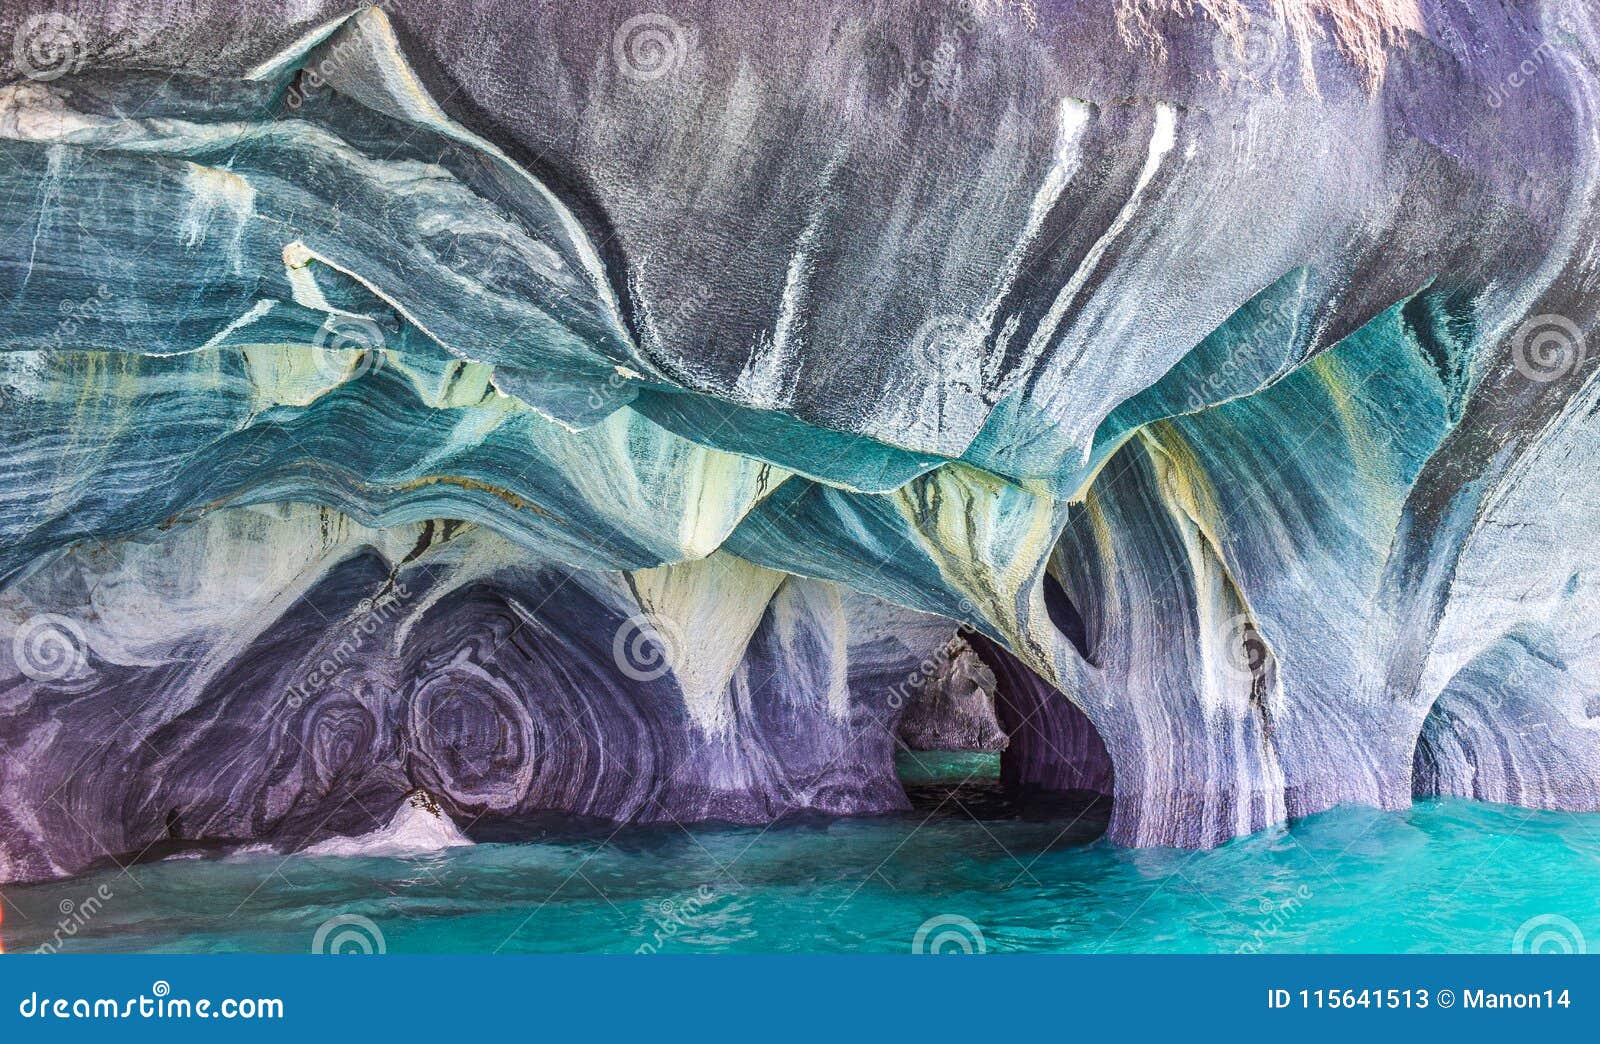 the blue colors of the marble caves in patagonia, chile.